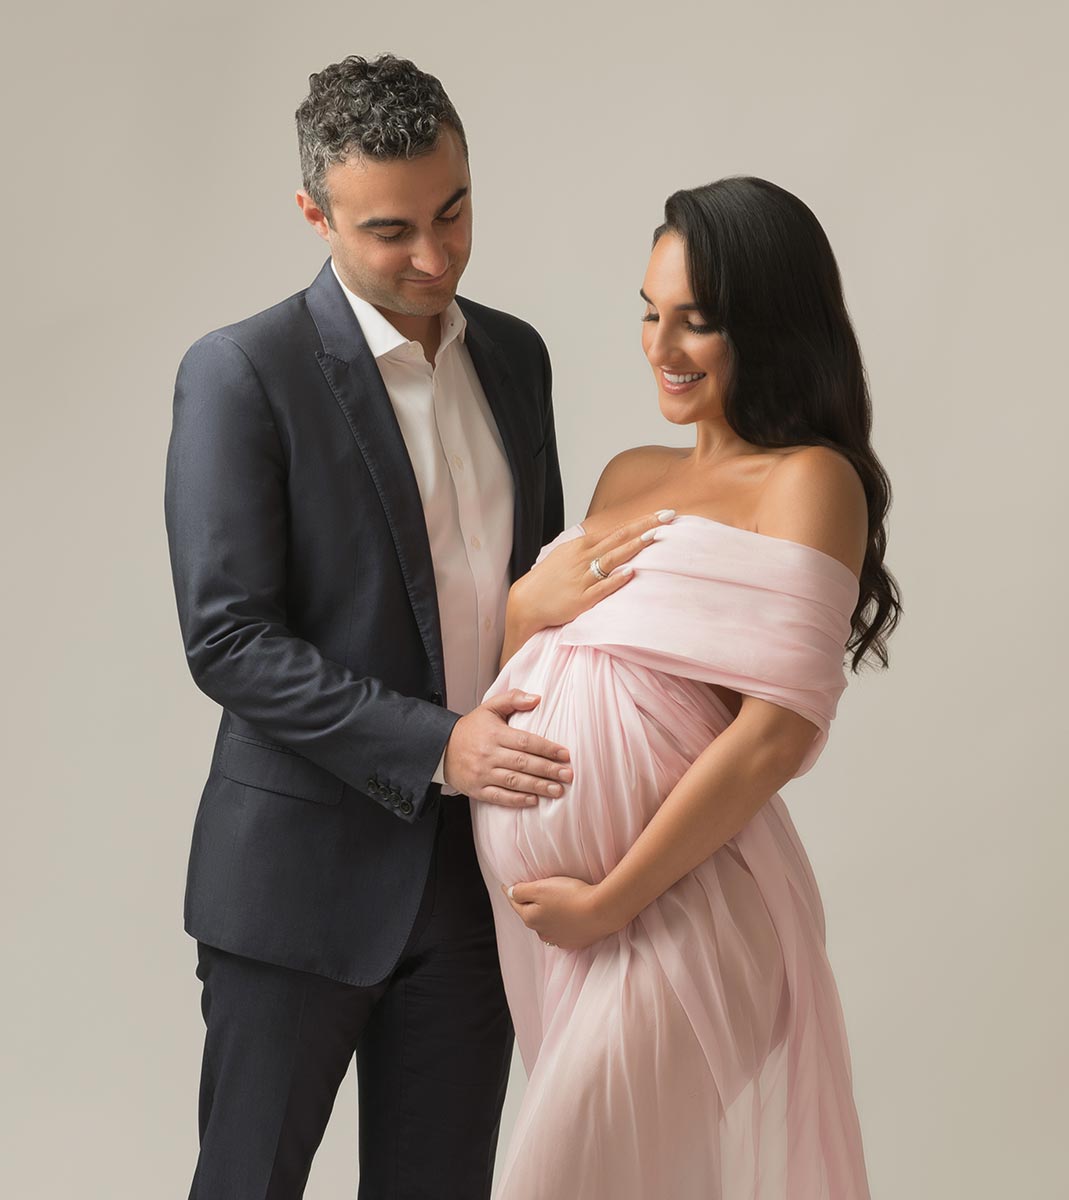 Husband in a suit posing for a pregnancy photo with his wife